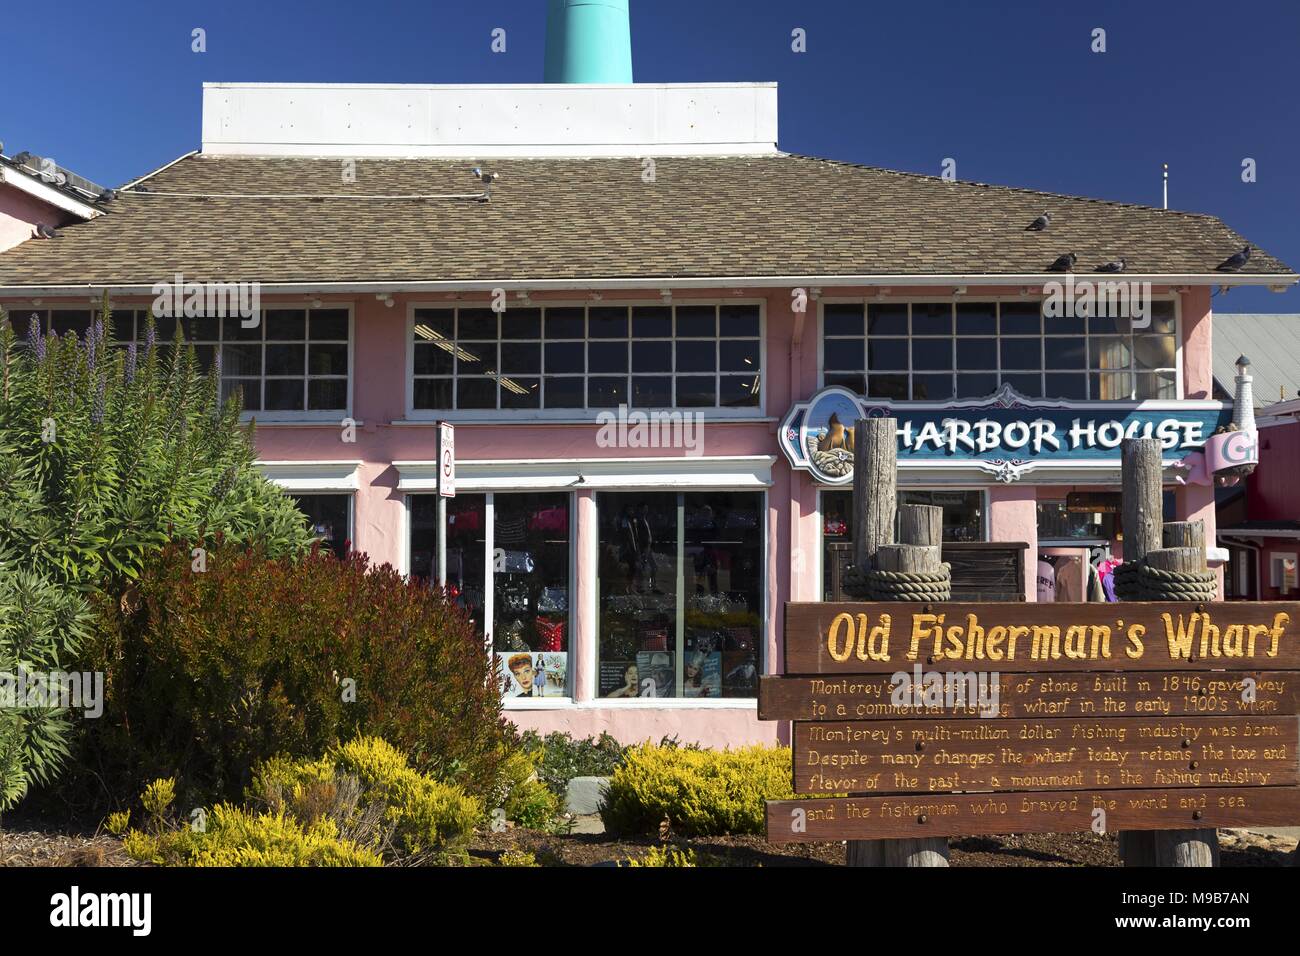 Harbor House Building Facade Exterior with Blue Sky at Entrance to World Famous Old Fisherman’s Wharf on Monterey Peninsula California USA Stock Photo